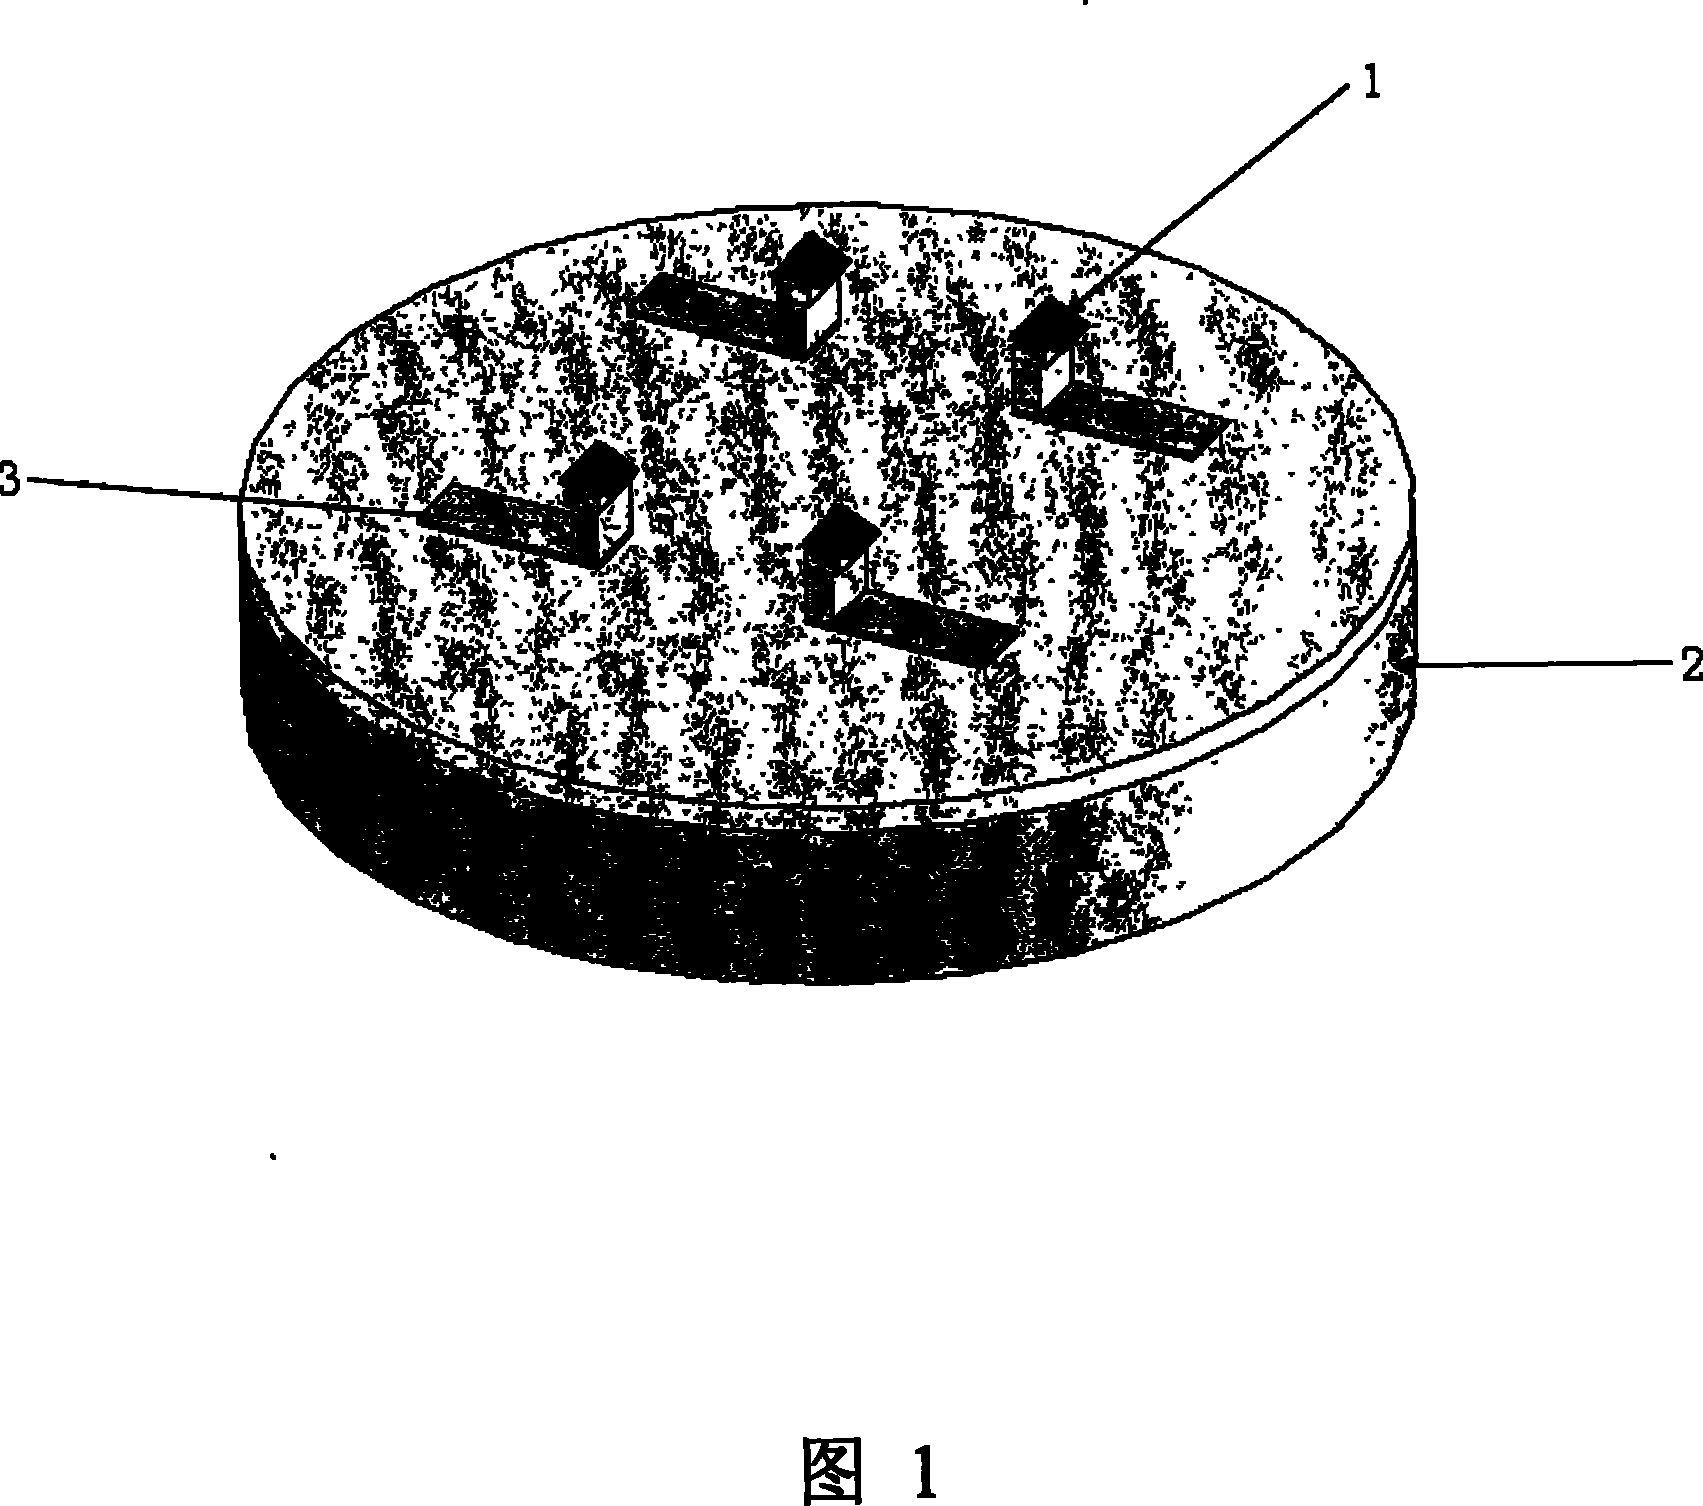 Micro-tip array device and its production method